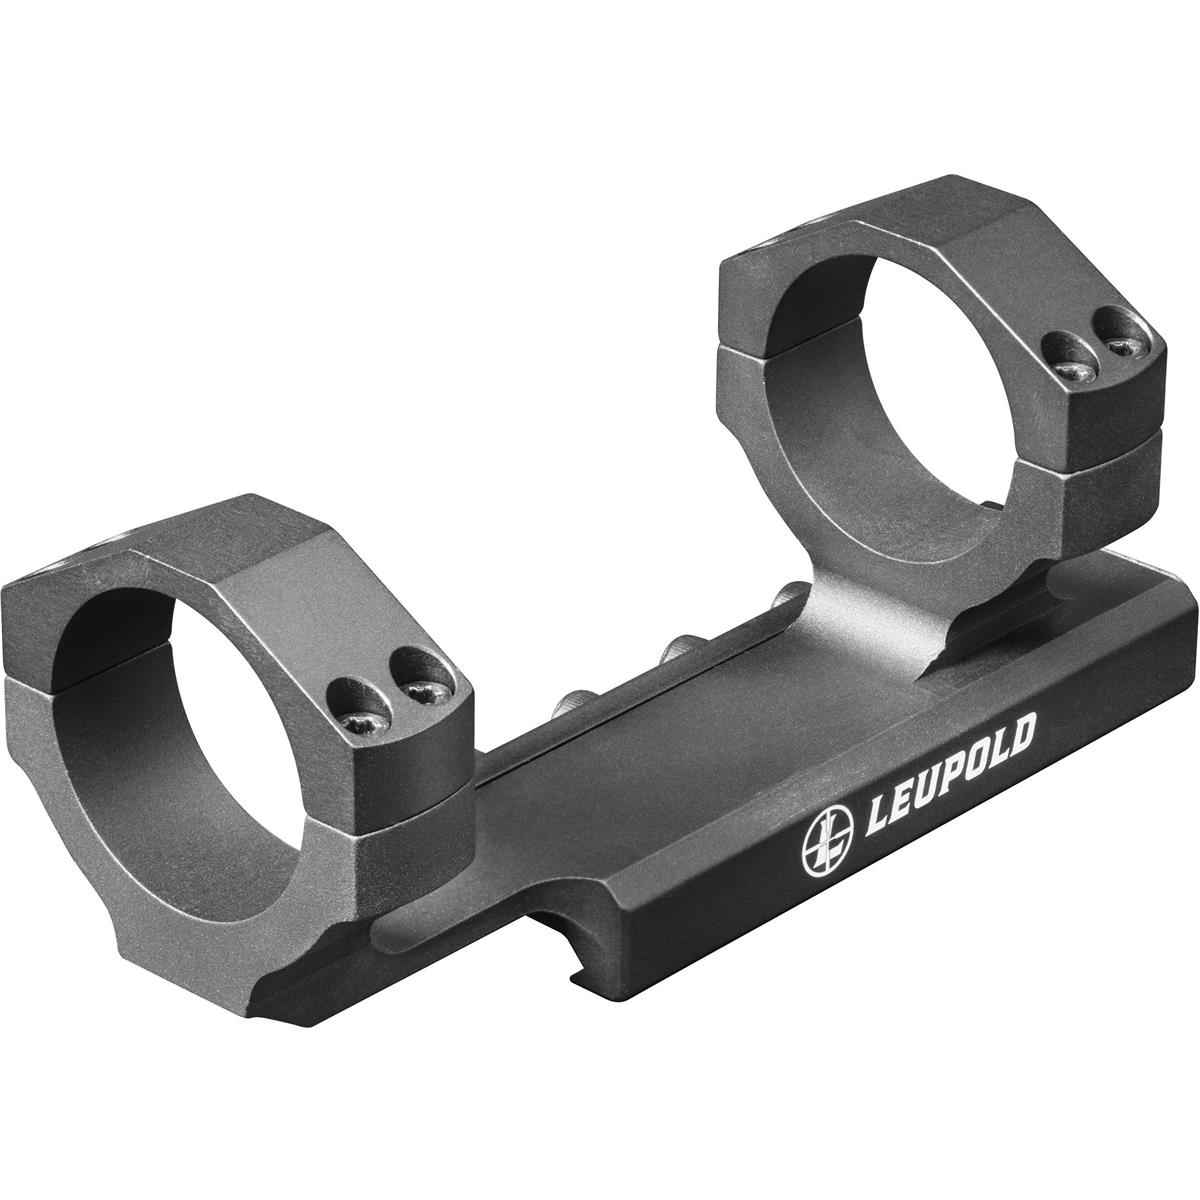 Image of Leupold Mark AR 34mm Integral Mounting System